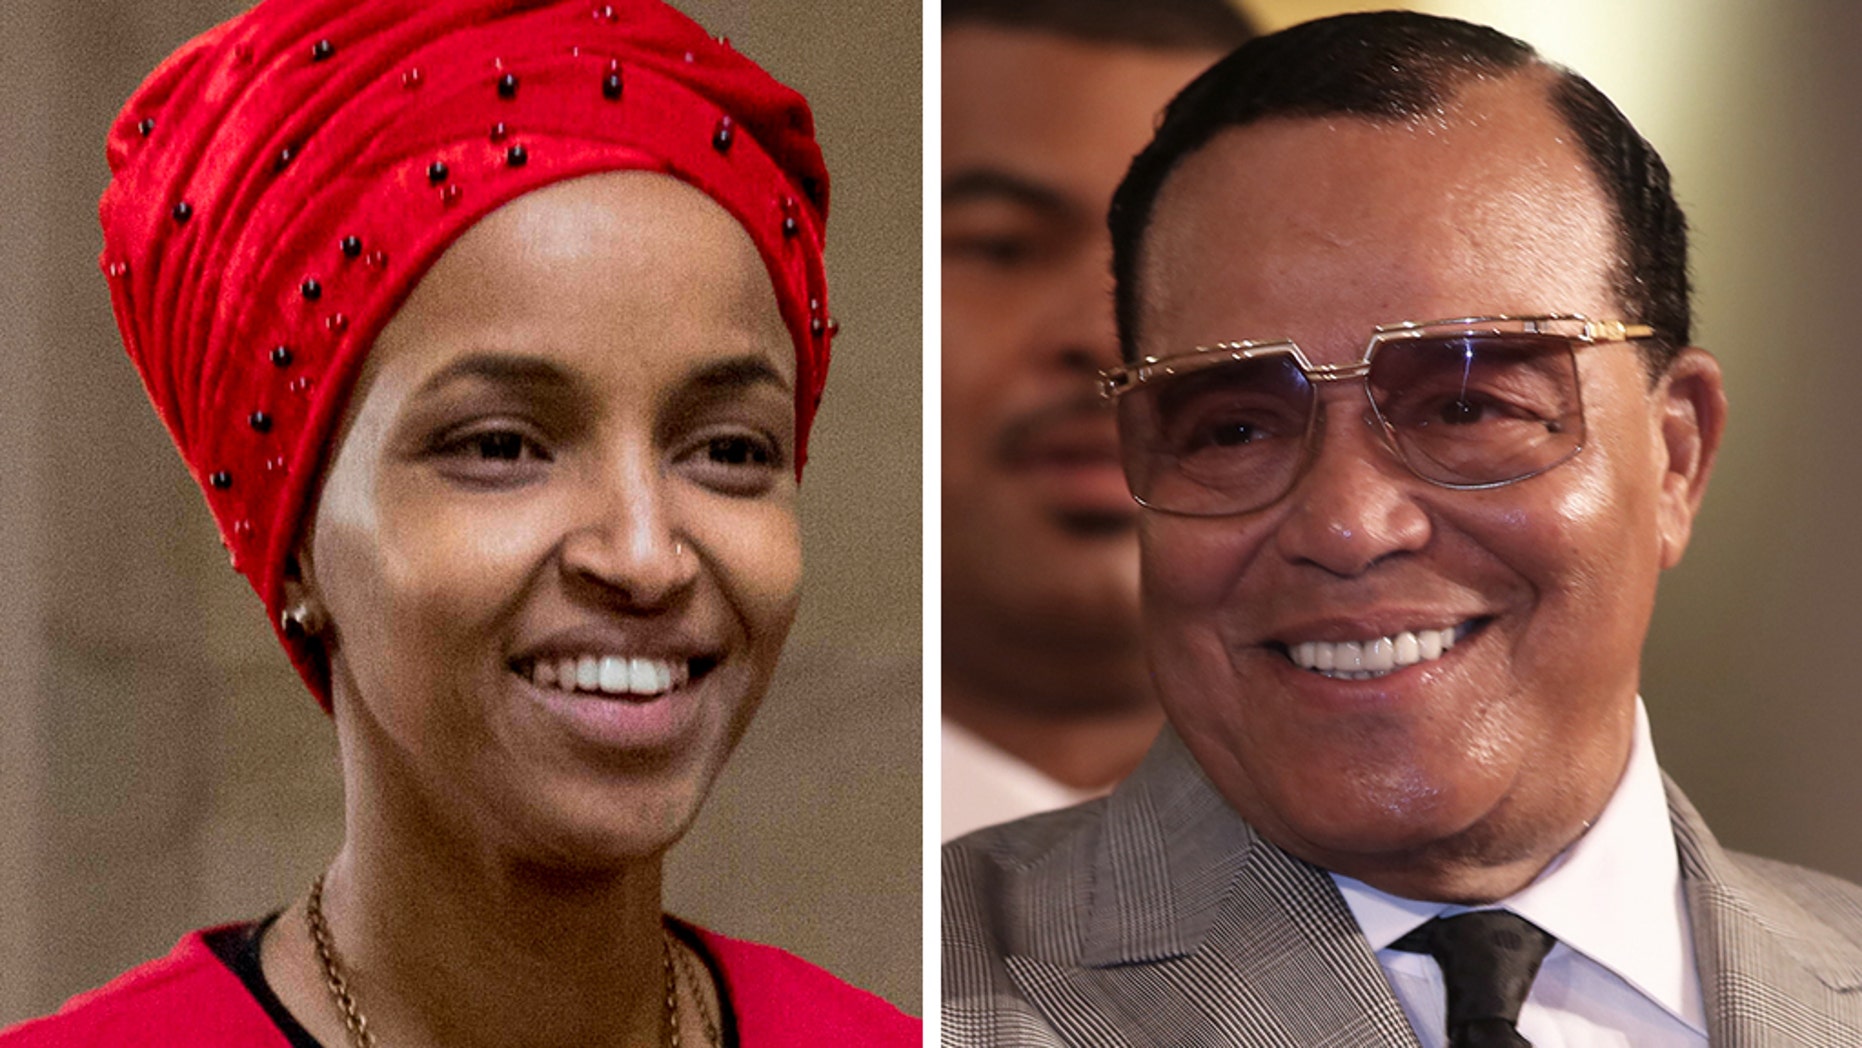 Rep. Ilhan Omar, D-Minn., And the leader of the Nation of Islam, Louis Farrakhan